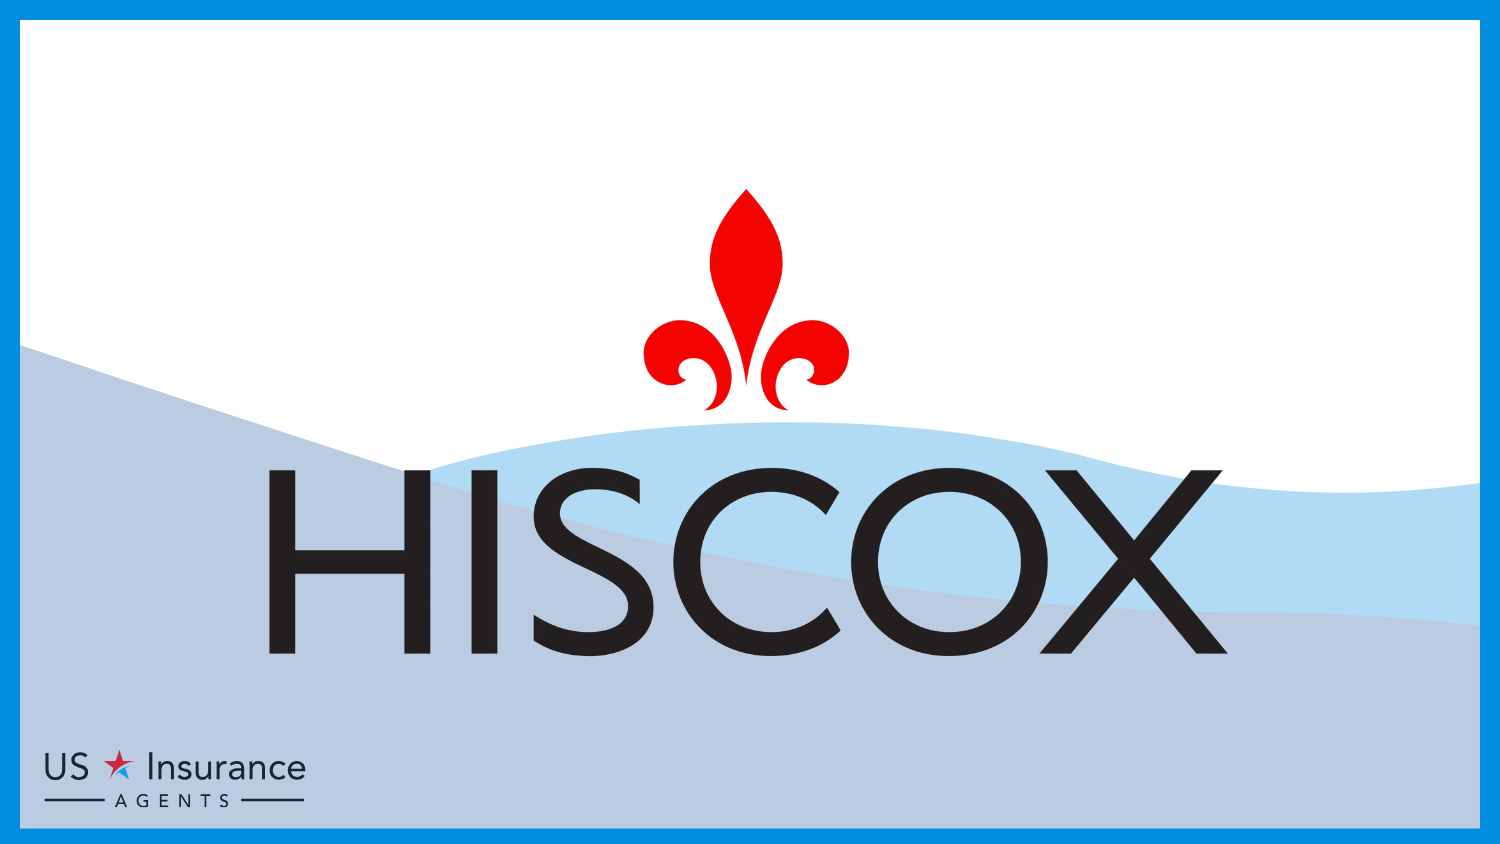 Hiscox: Best Business Insurance for Car Rental Services